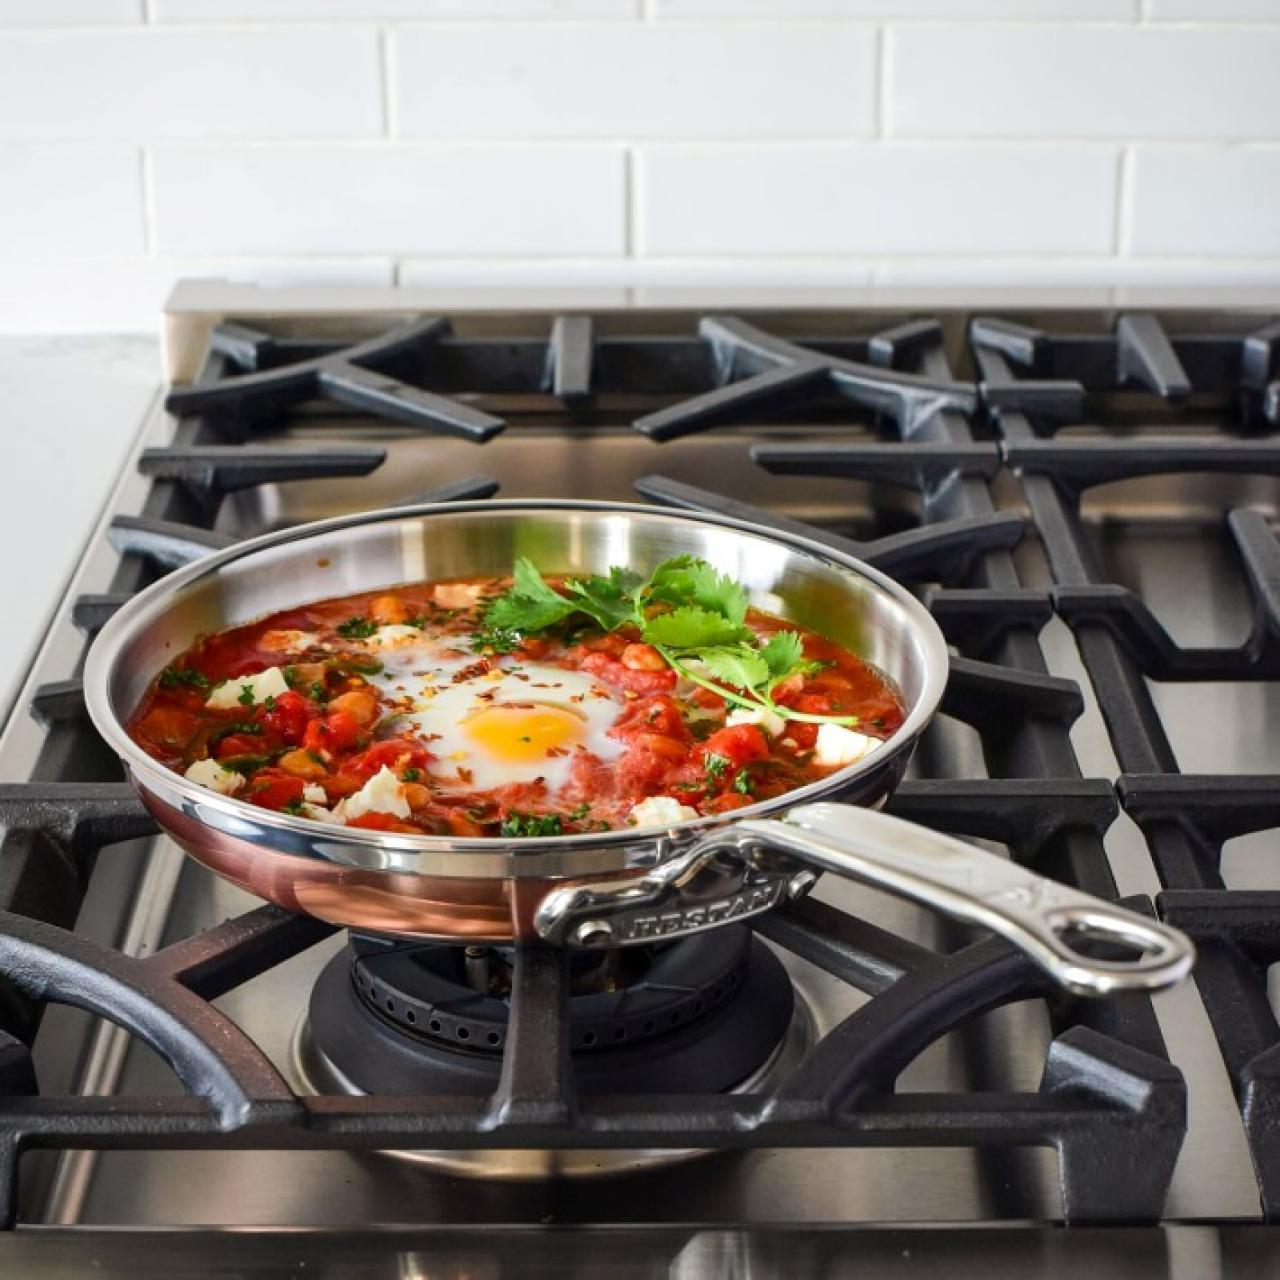 Hestan's Cookware Is On Major Sale Right Now